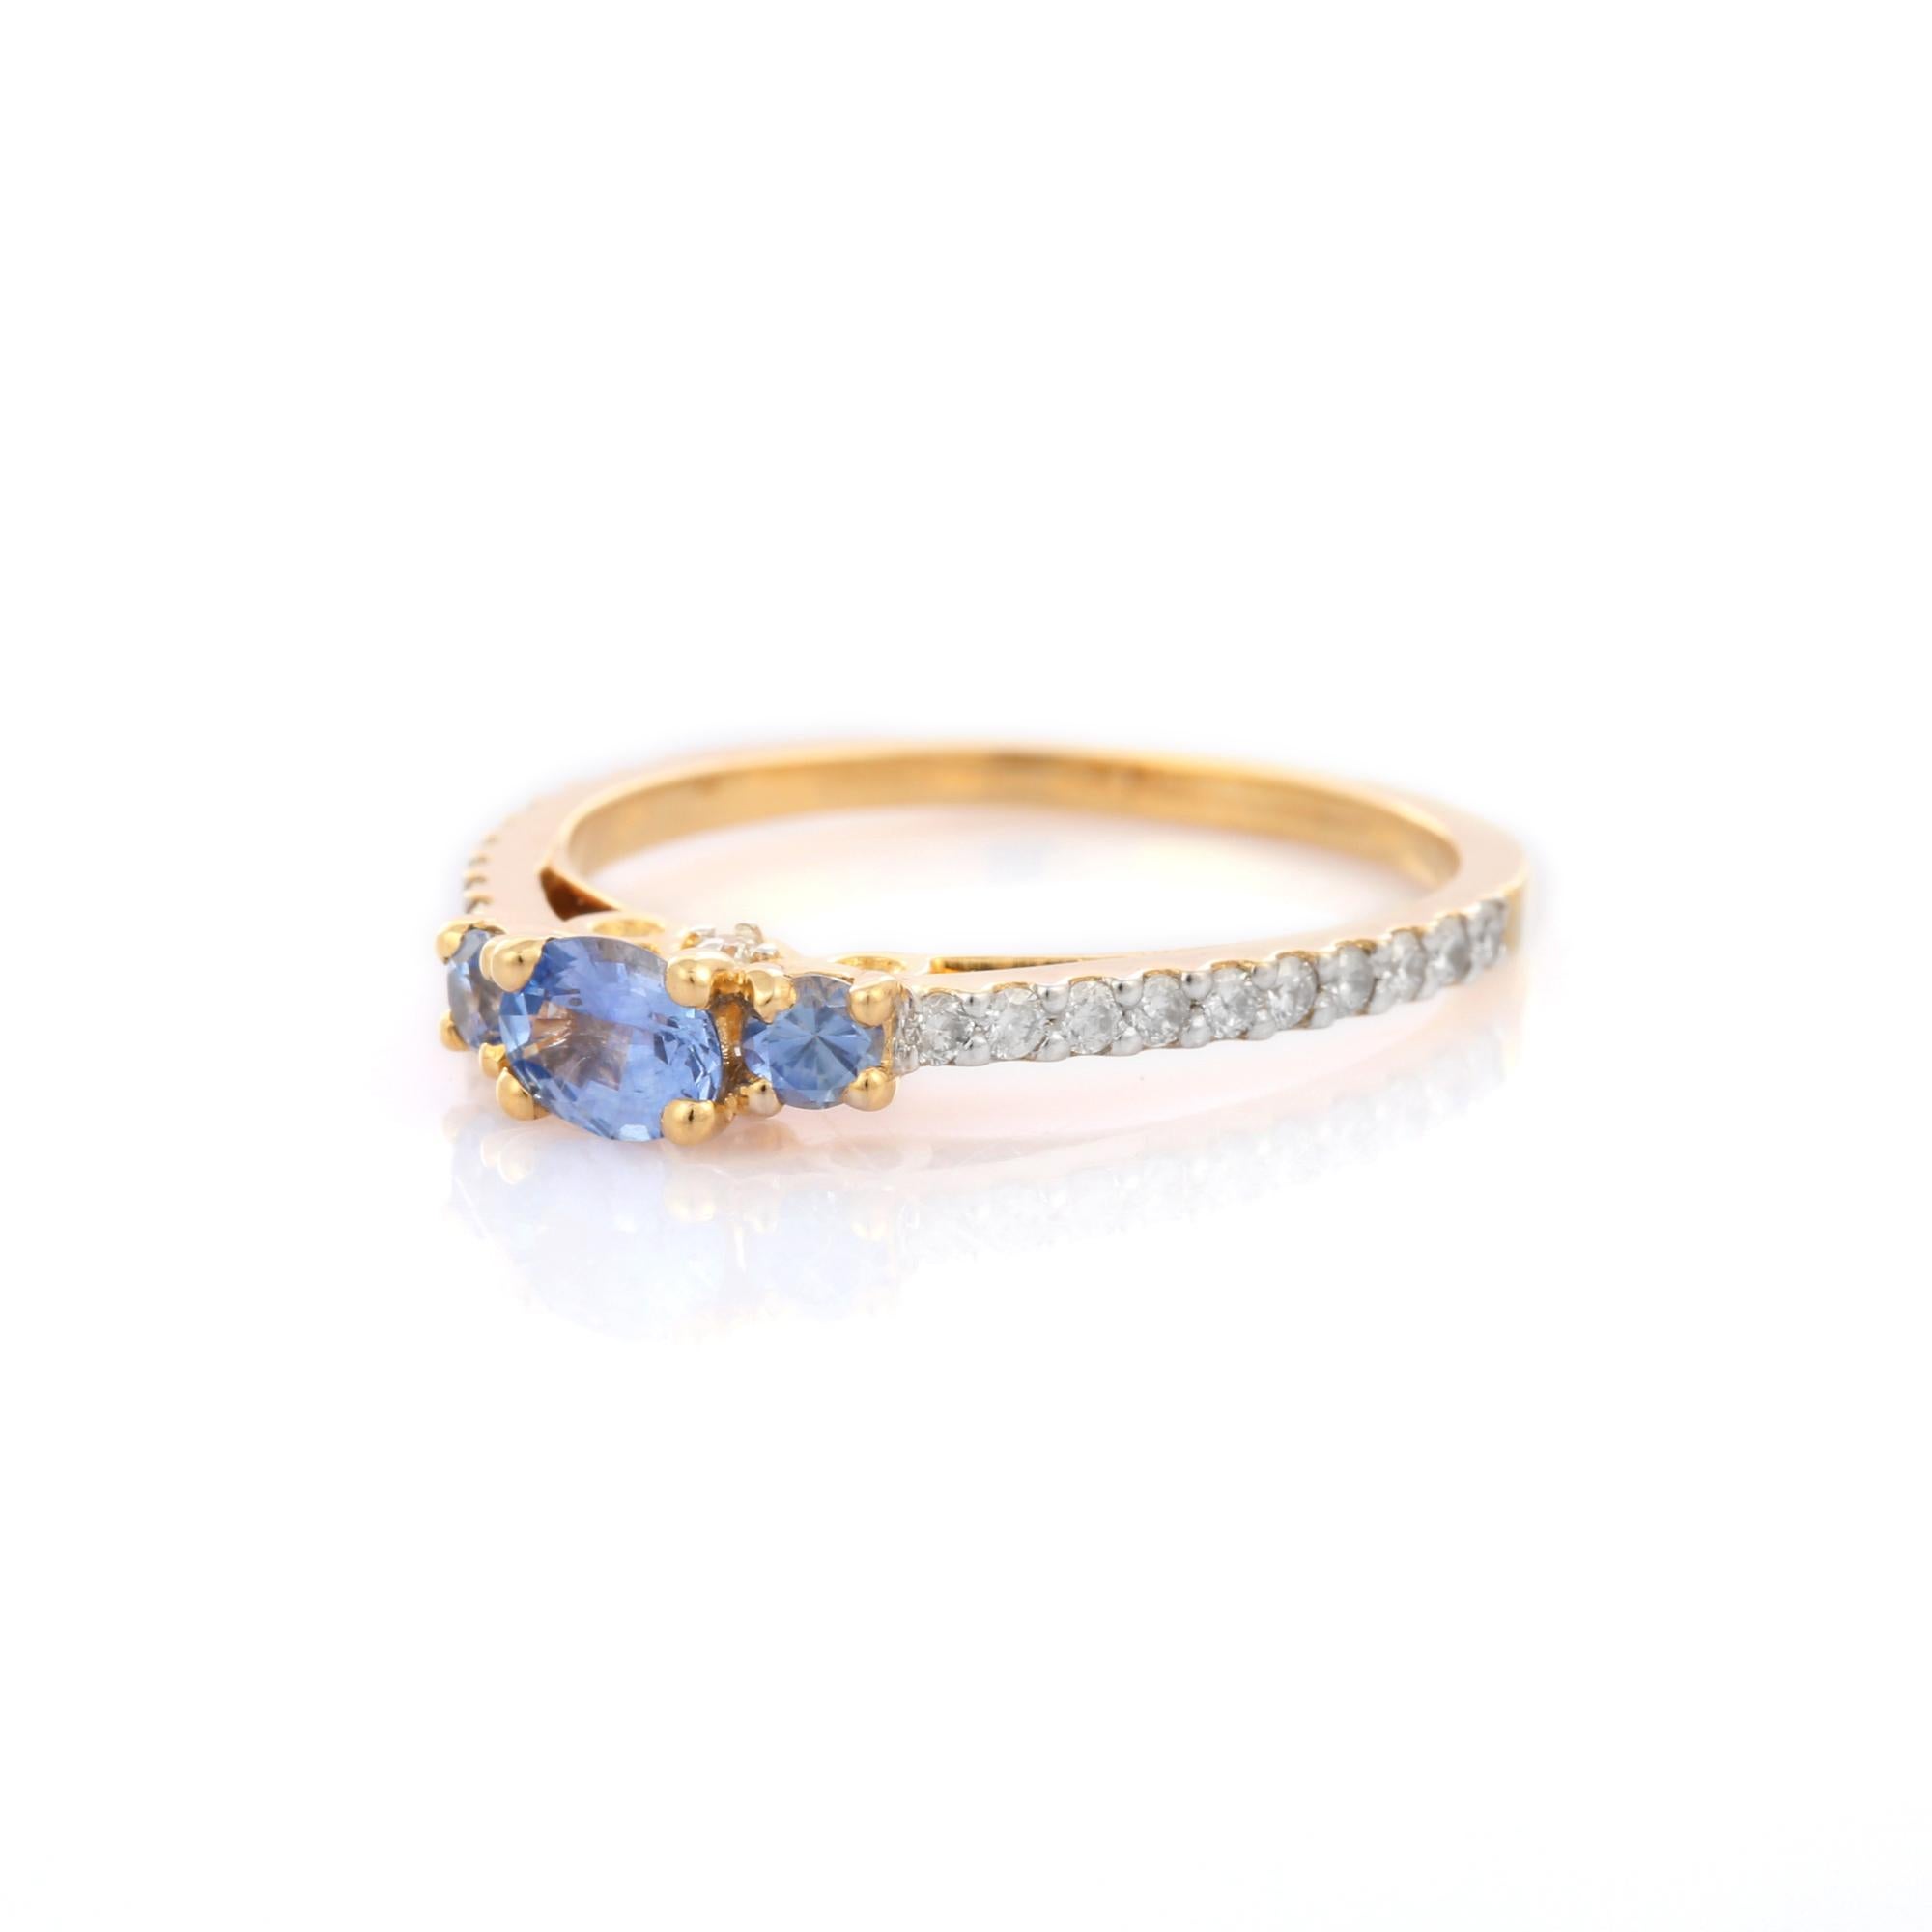 For Sale:  Minimalist Three Stone Blue Sapphire and Diamond Ring in 14K Solid Yellow Gold 3